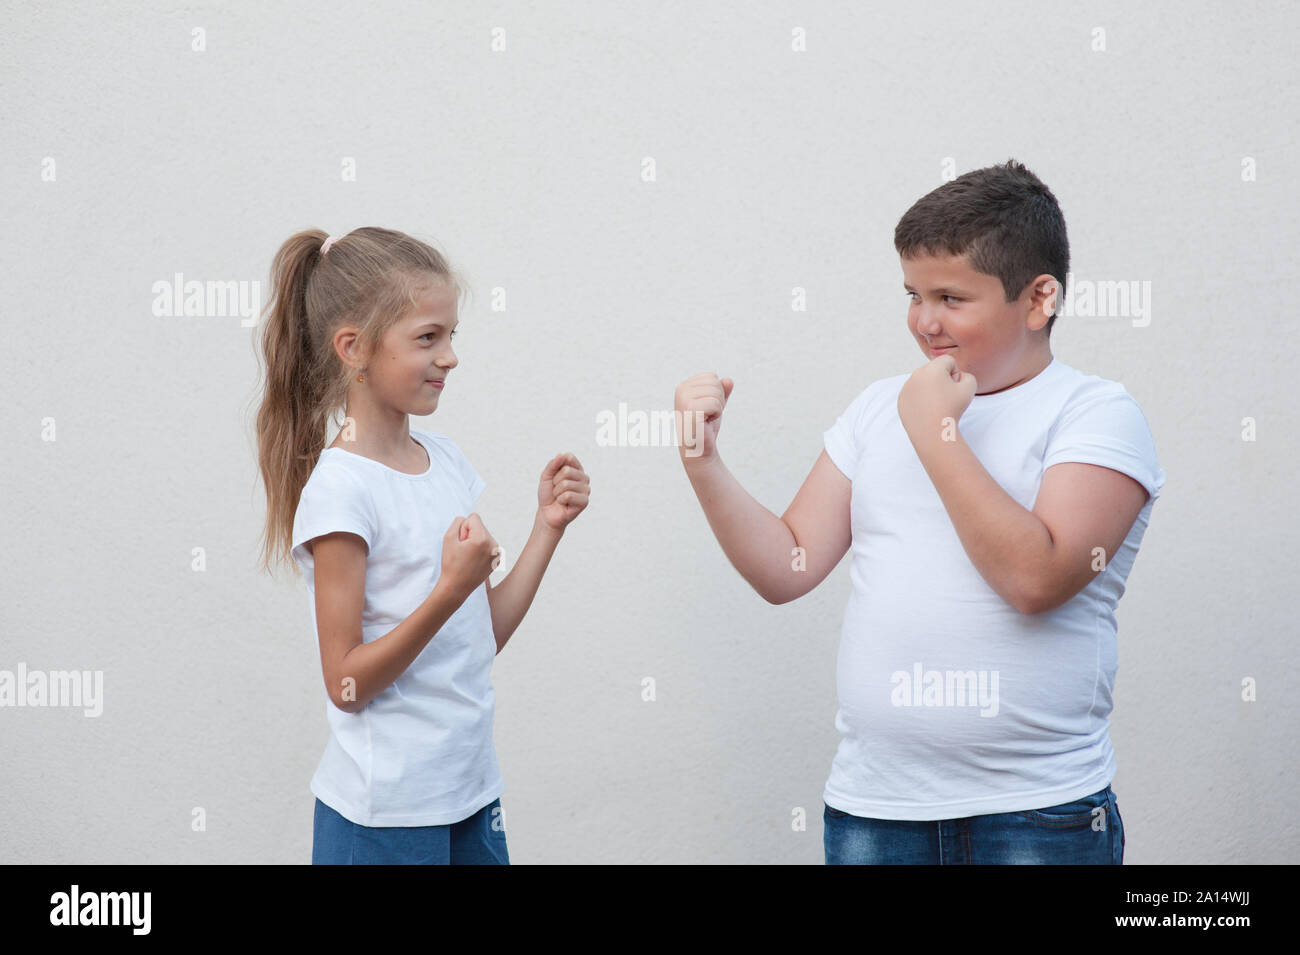 gender issues concept of two kids little thick boy against small thin girl holding fist ready to fight Stock Photo